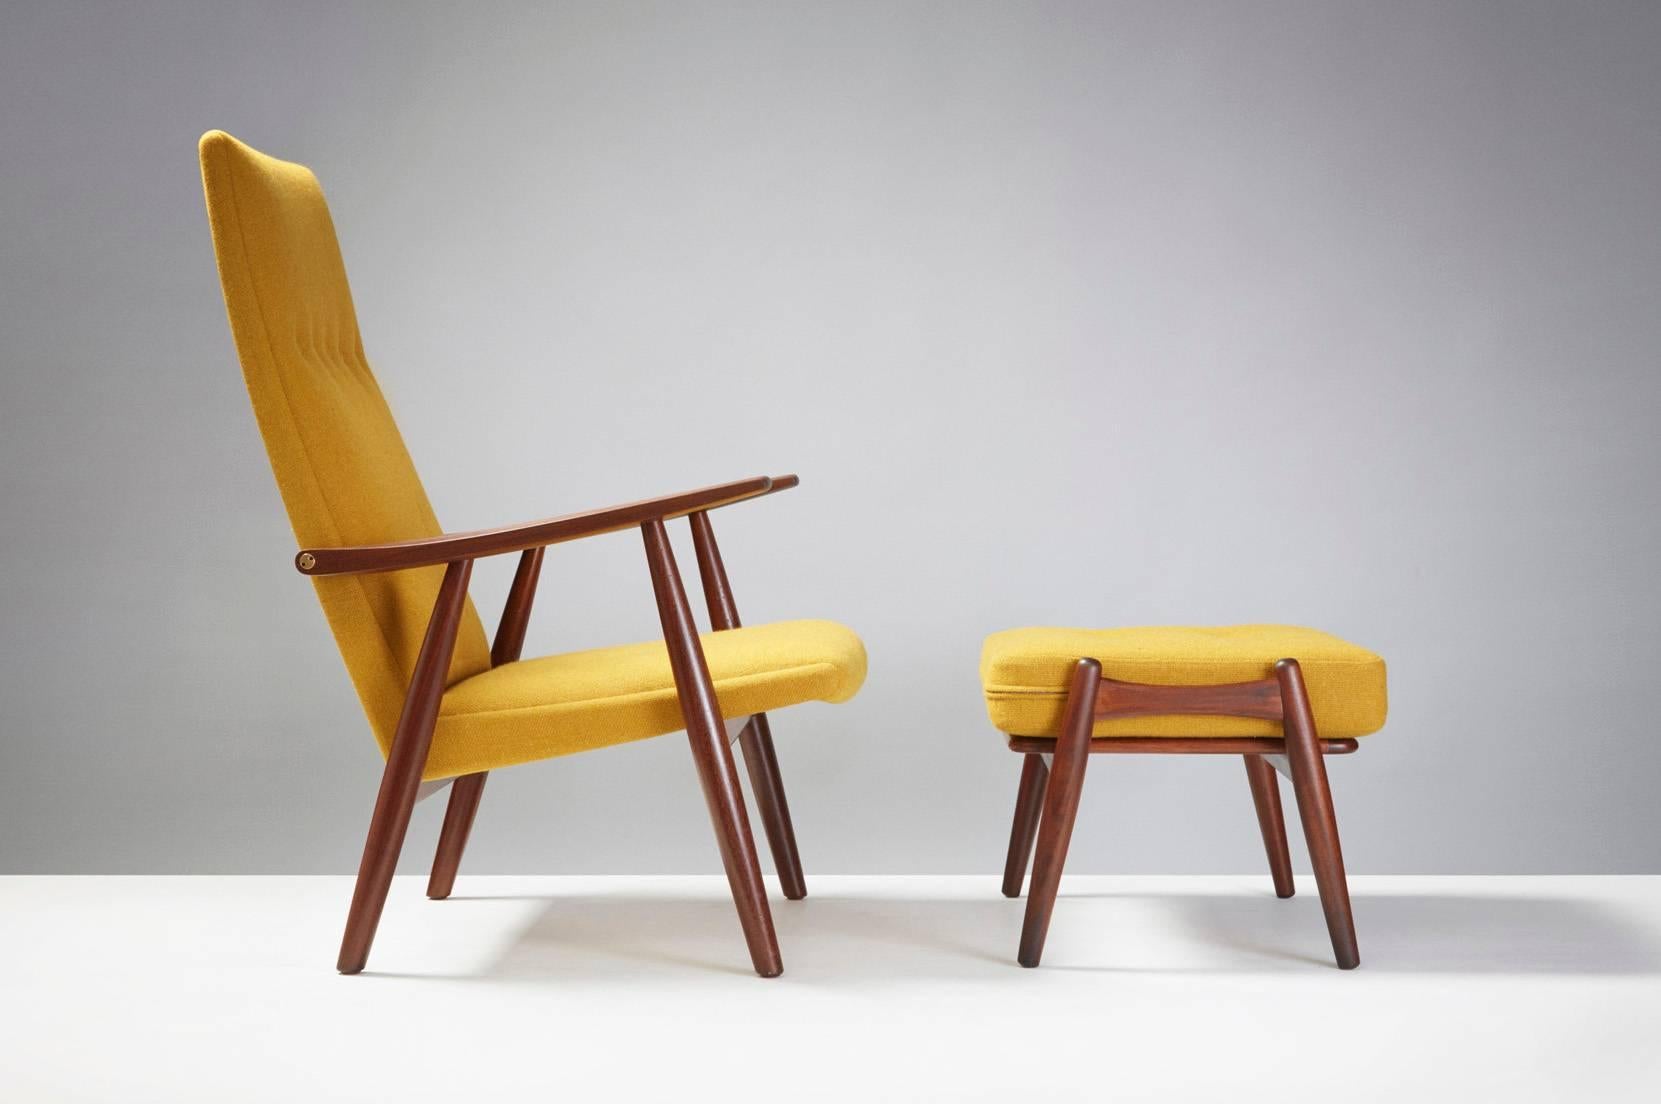 Designed 1958, produced by GETAMA, Denmark. Afromosia African teak frame with seat and cushion reupholstered in Bute wool fabric. Matching foot stool.
 